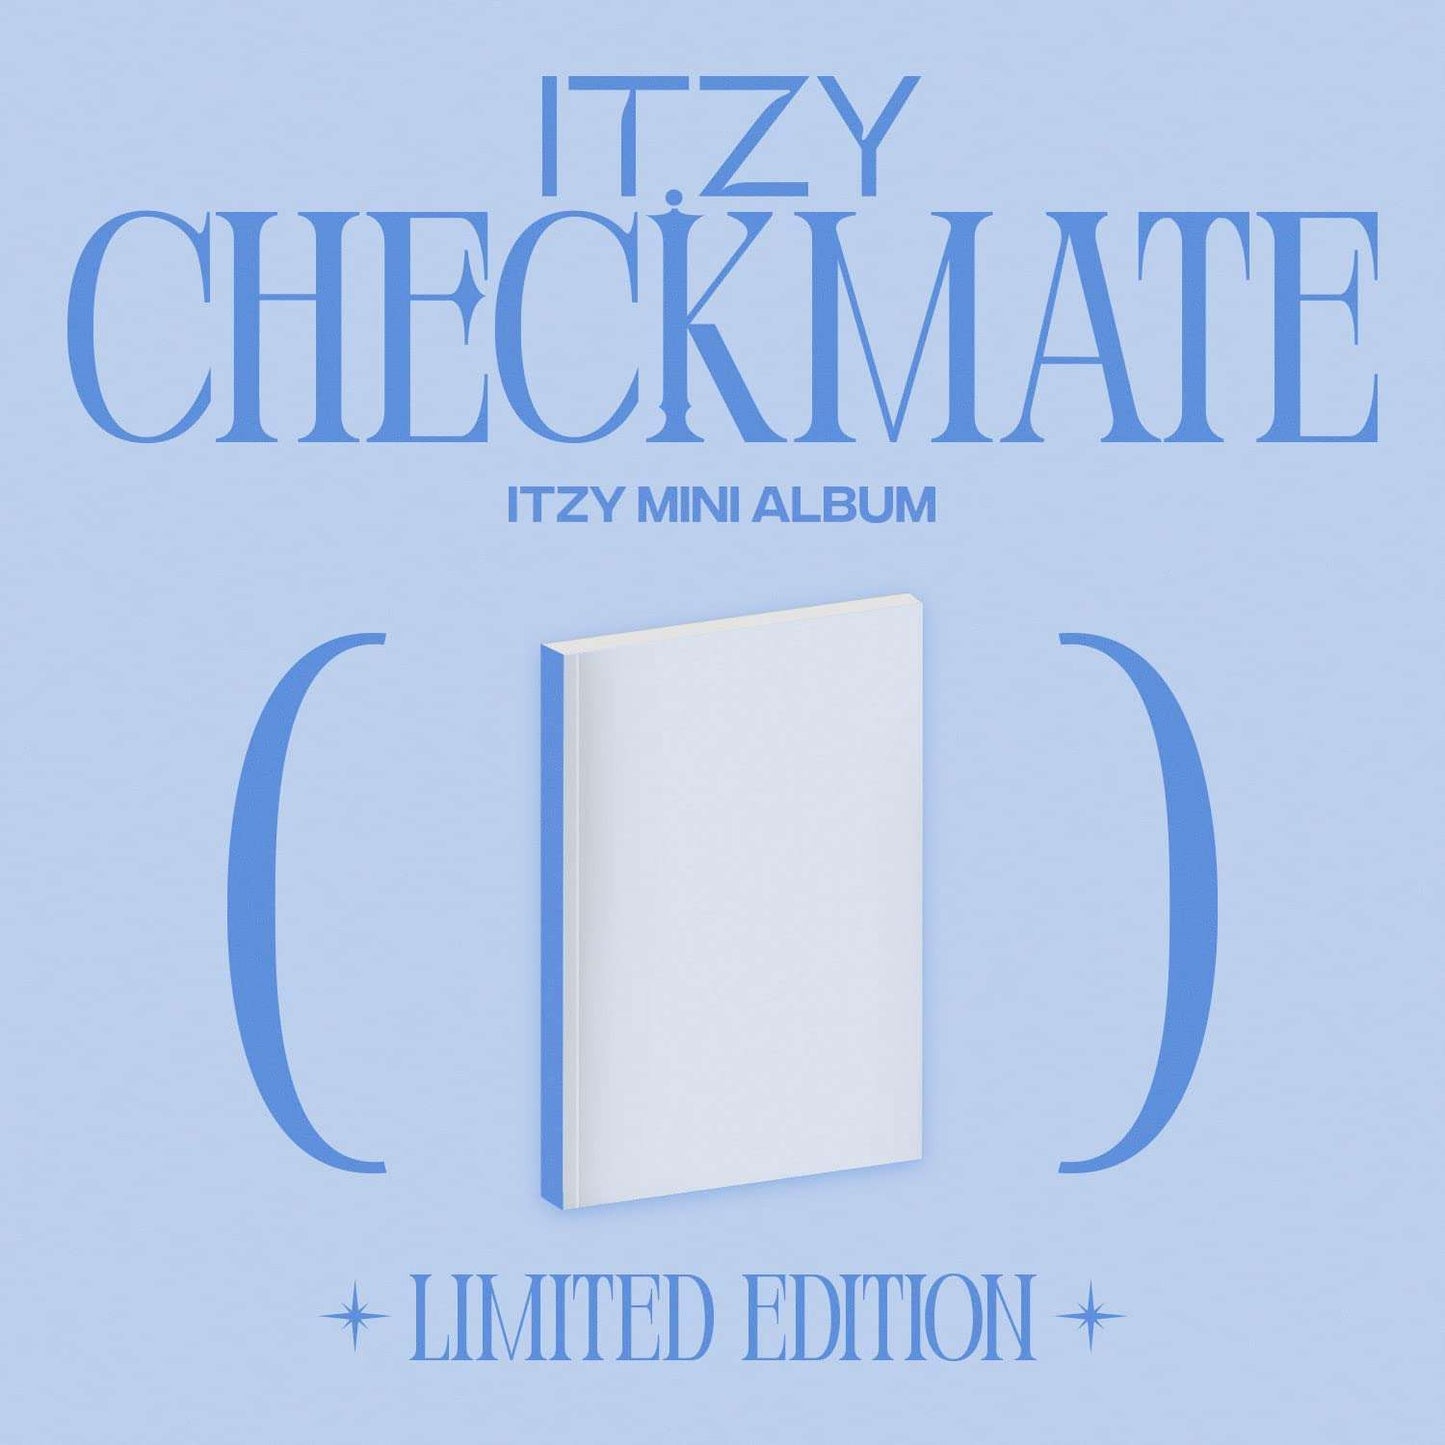 Itzy Checkmate Limited Version - Zhivago Gifts